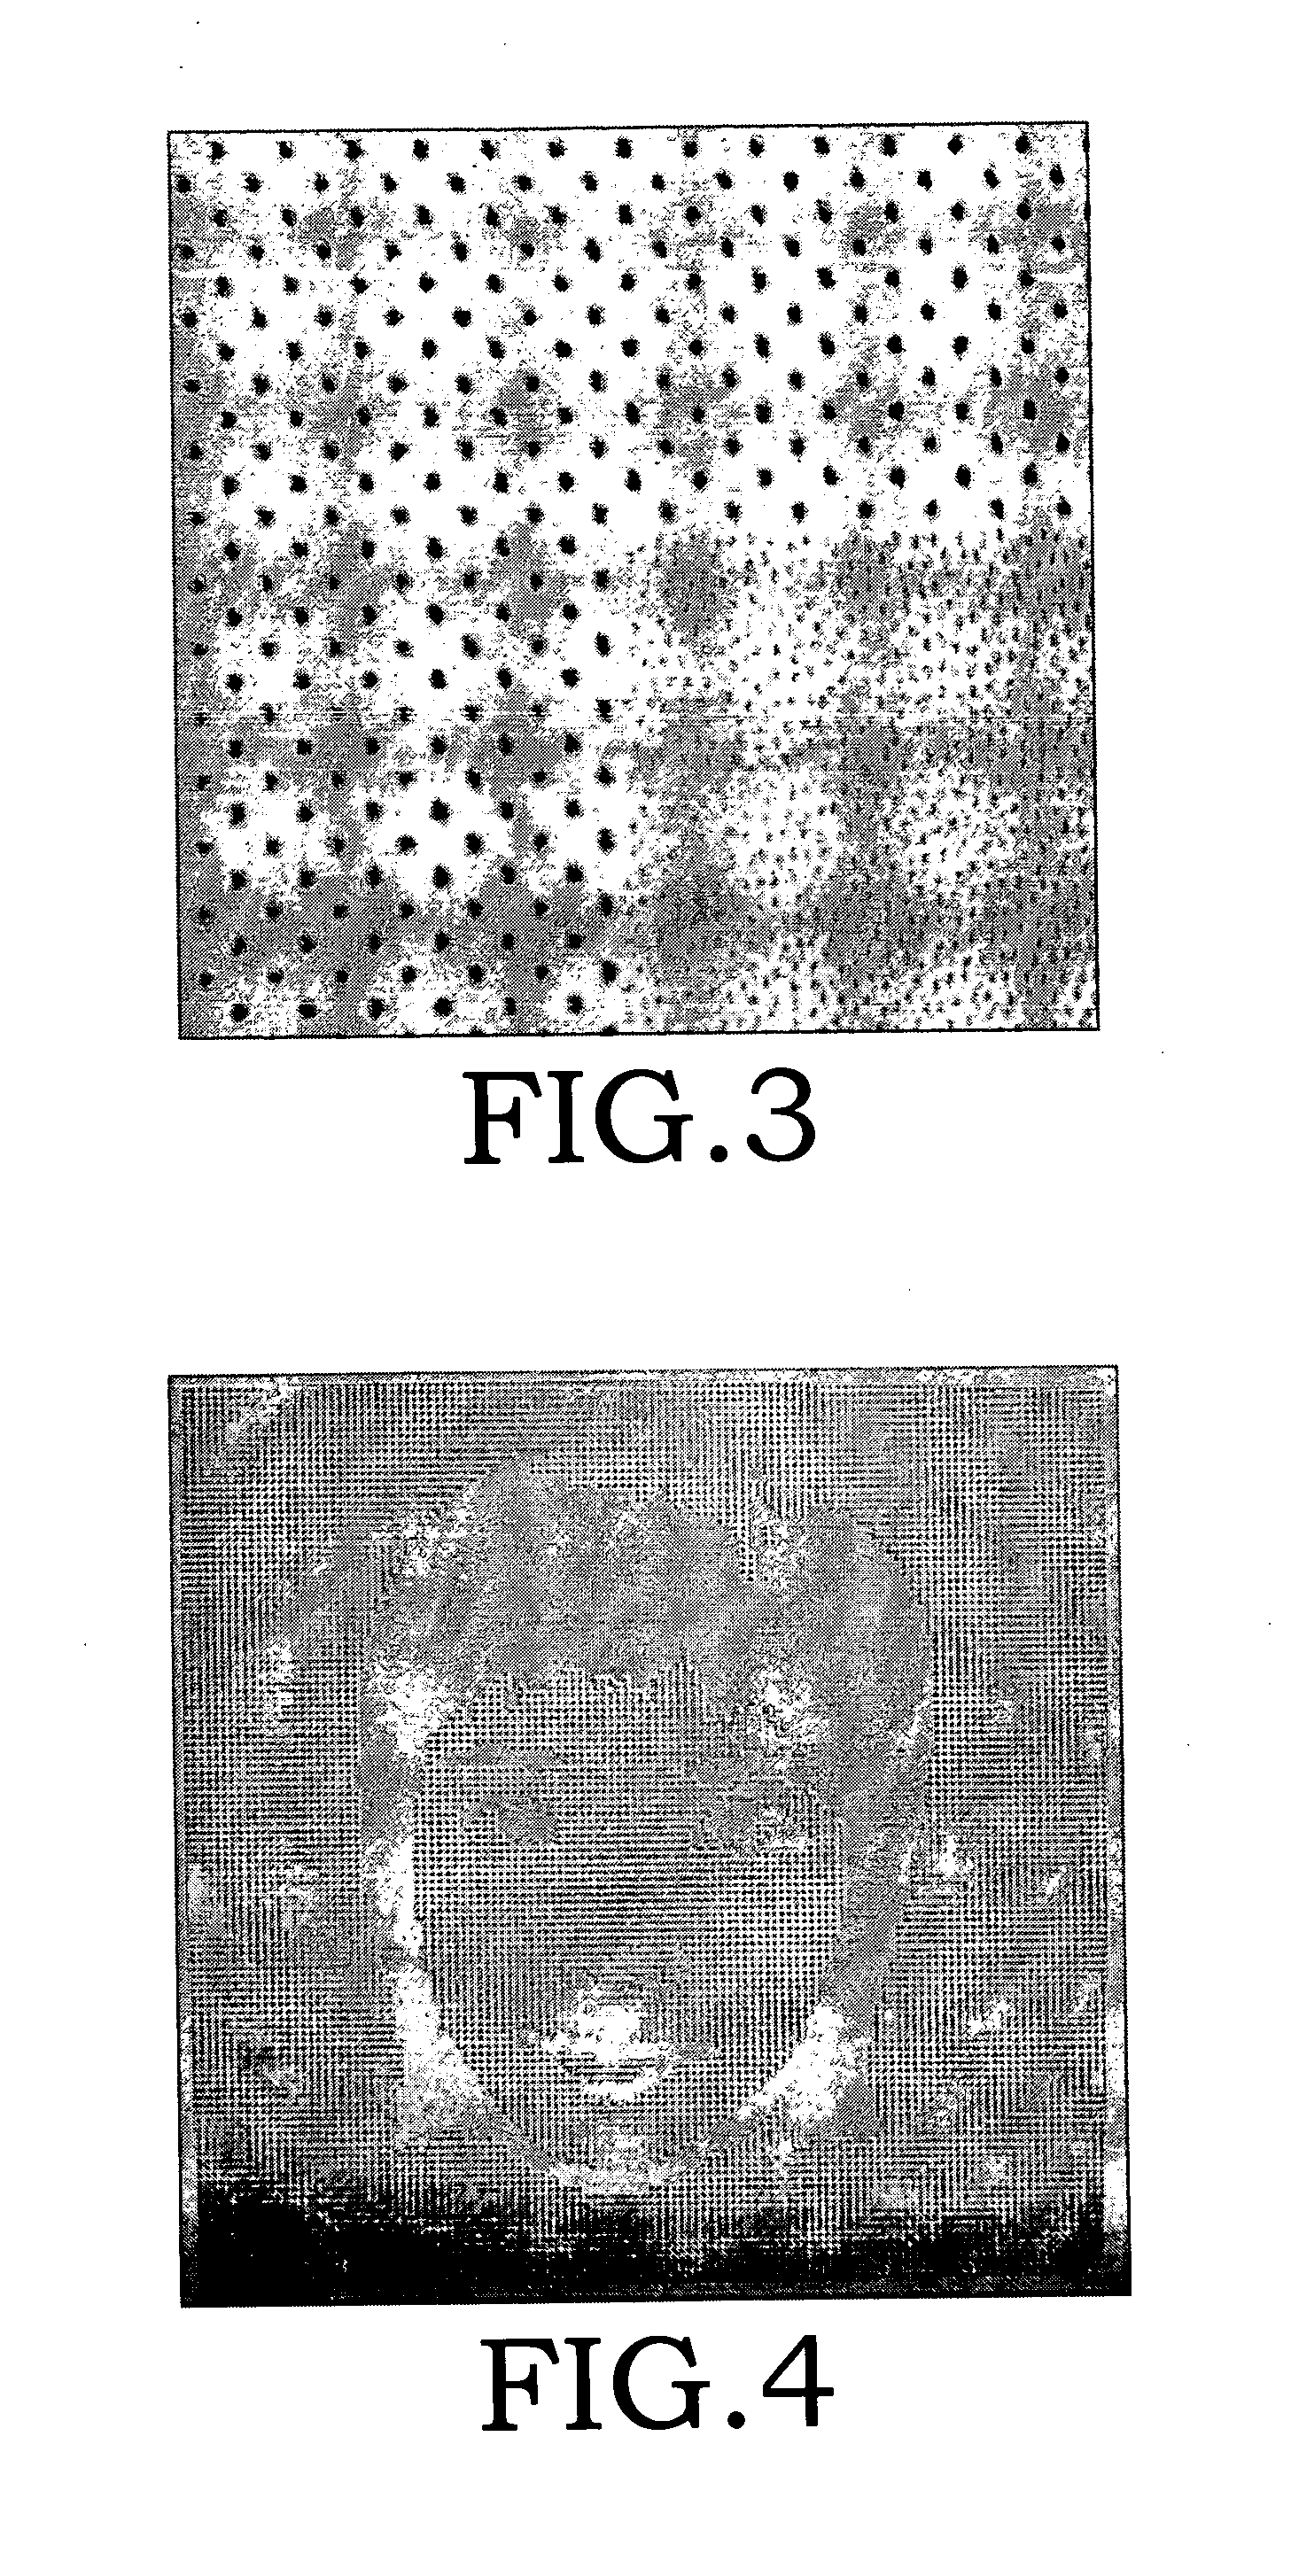 Method of watermark with hybrid halftone dots